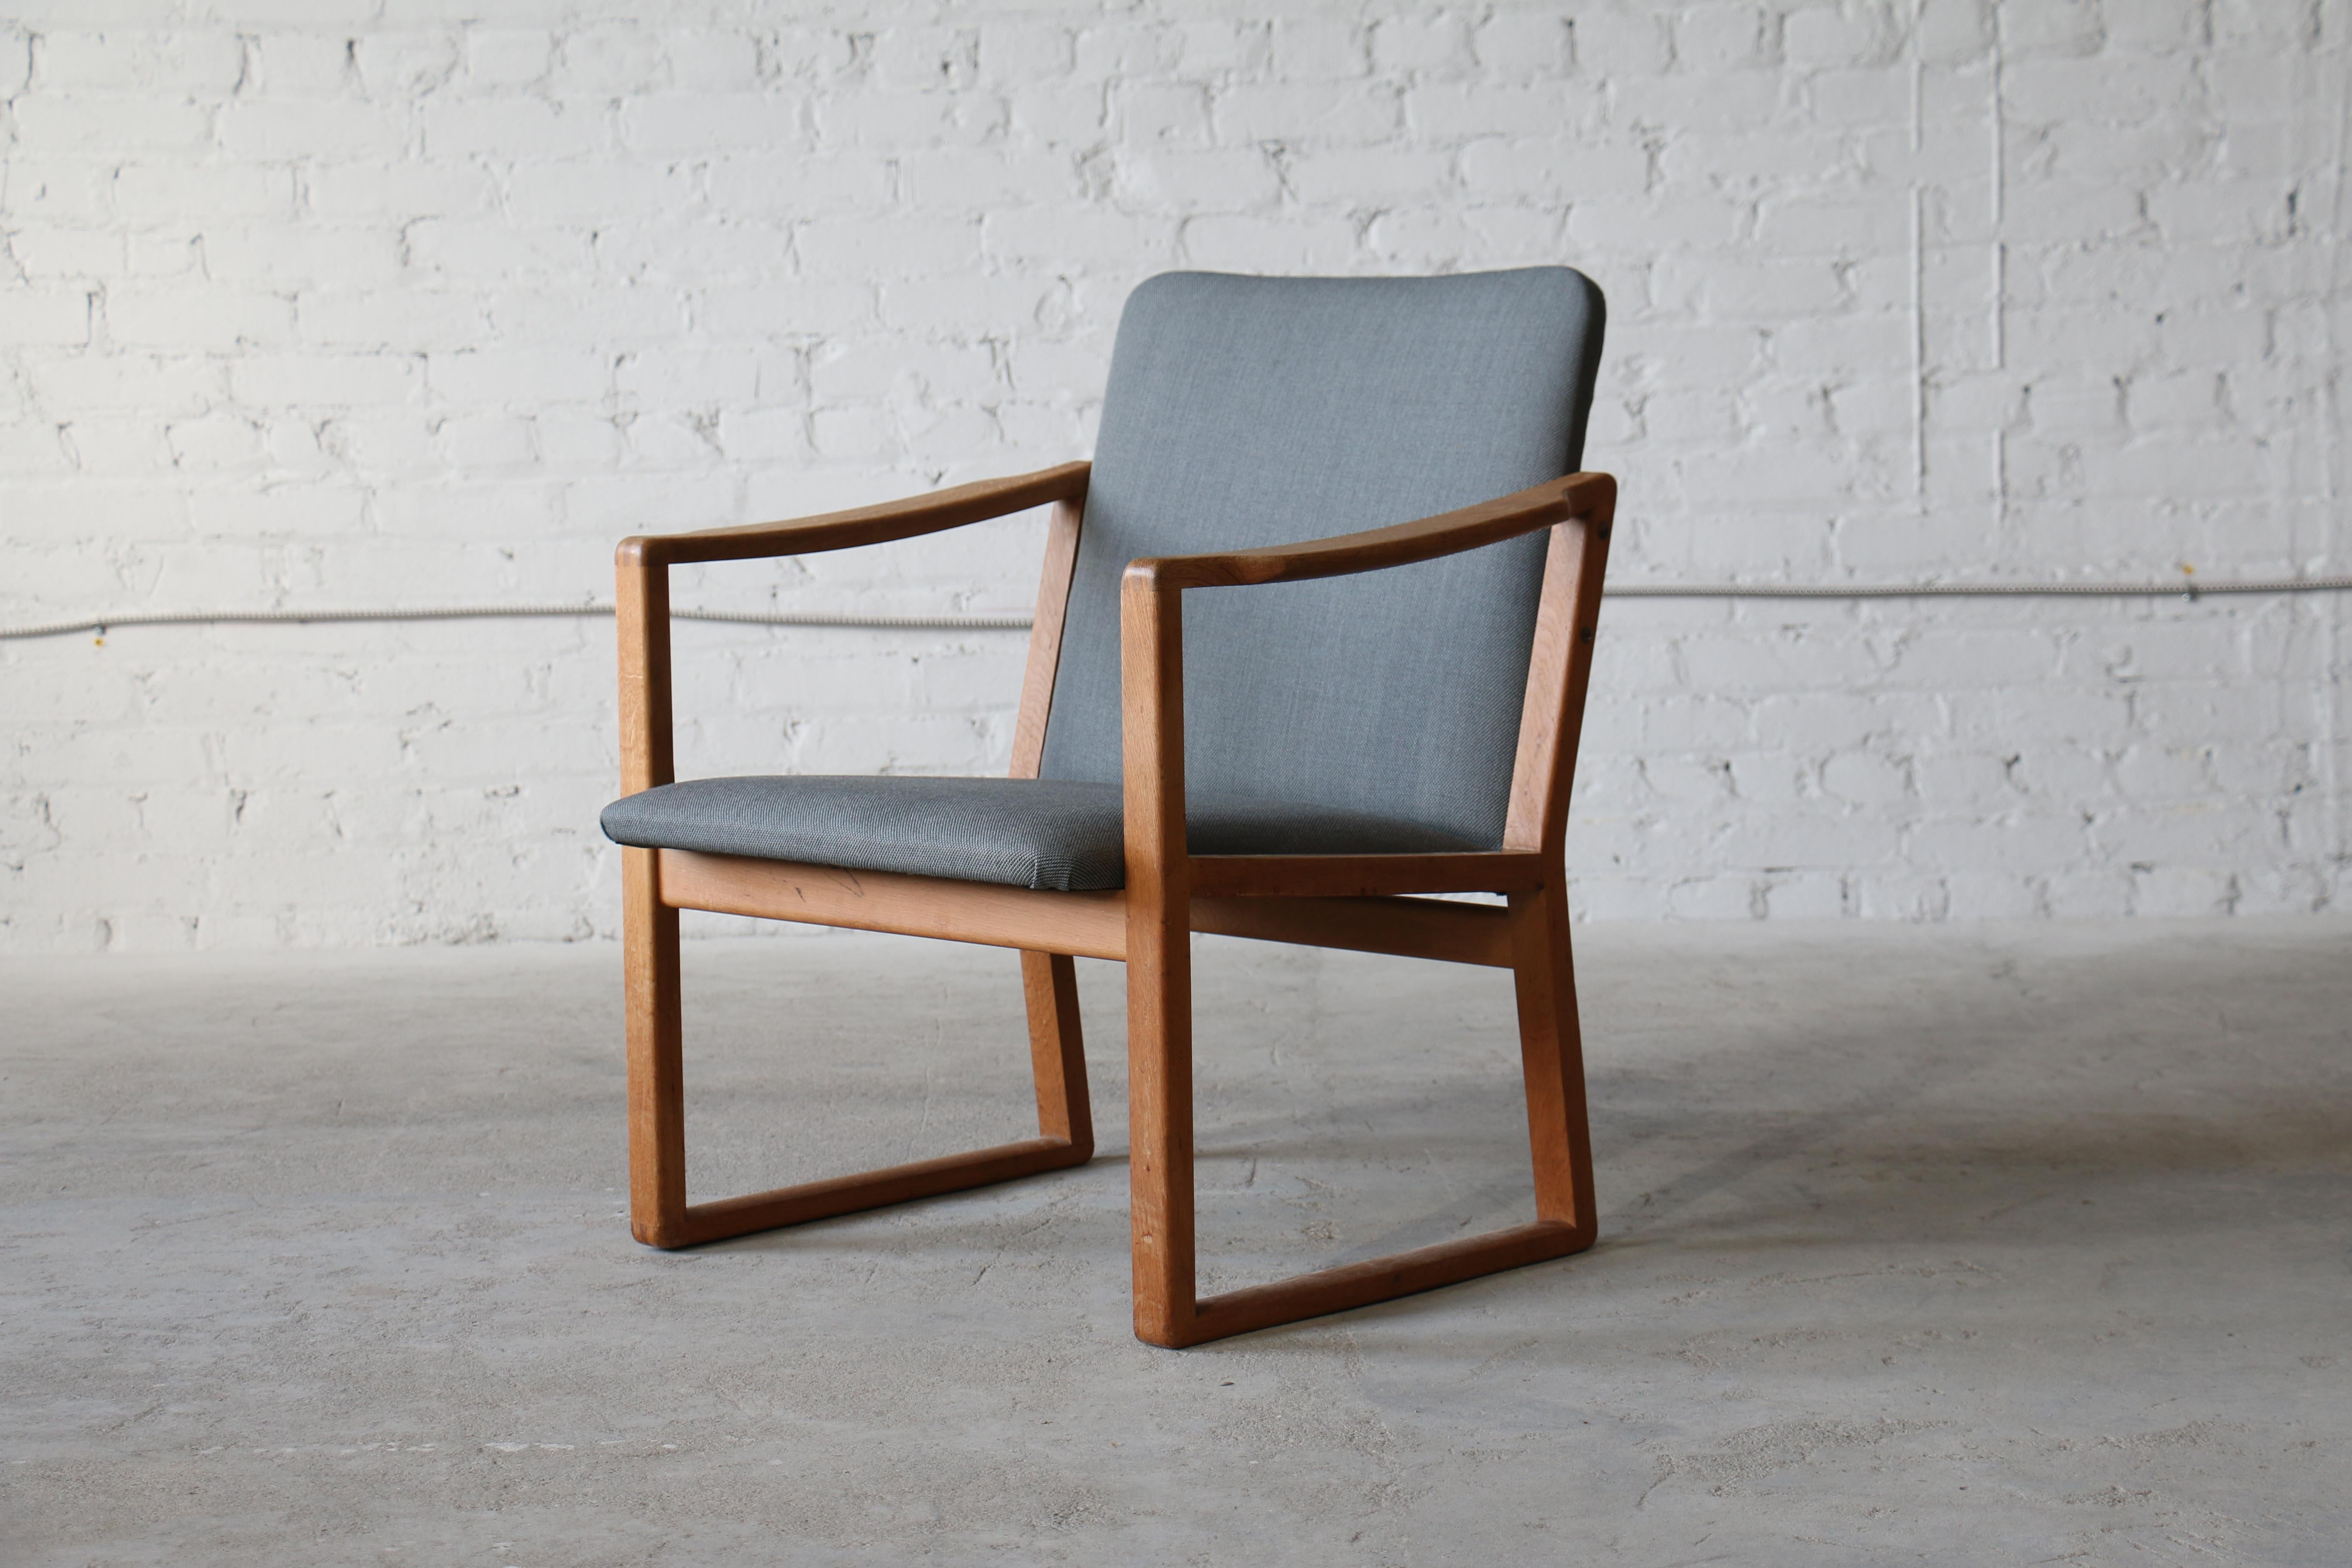 This design was manufactured by Fredericia for only a brief period making it relatively rare. The construction exhibits classic Mogensen characteristics. Notably, the sled style legs and the finger jointed armrests (and legs) which really show off